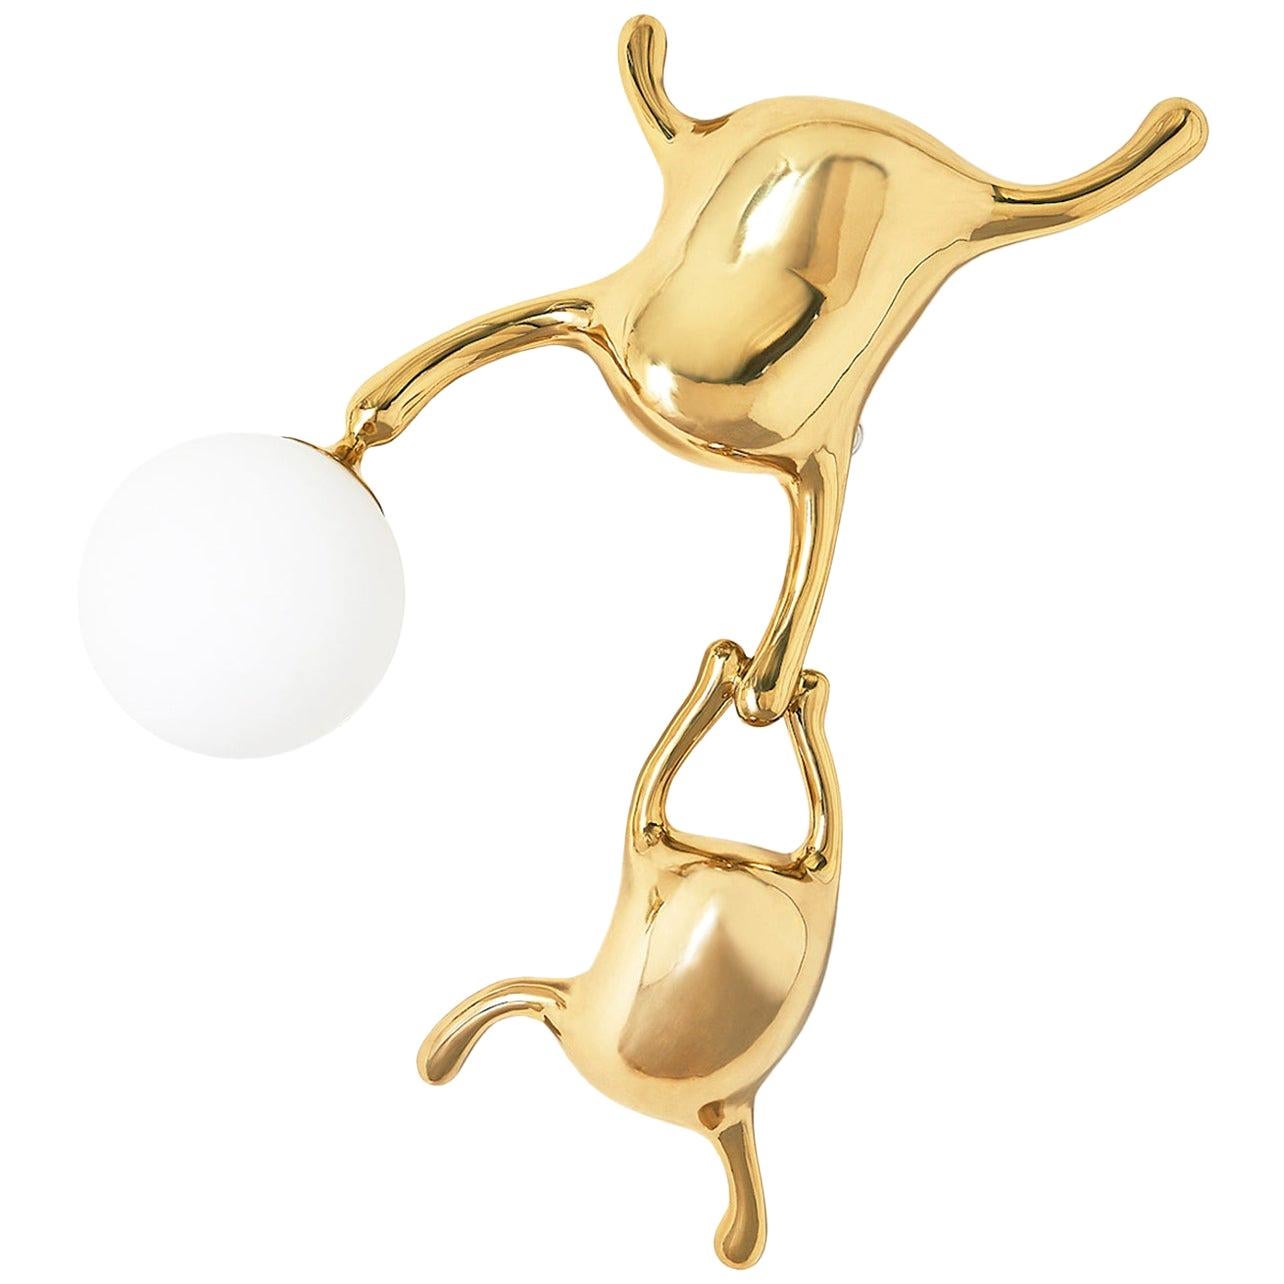 TanTan Wall Lamp No.4 Polished Brass and Glass